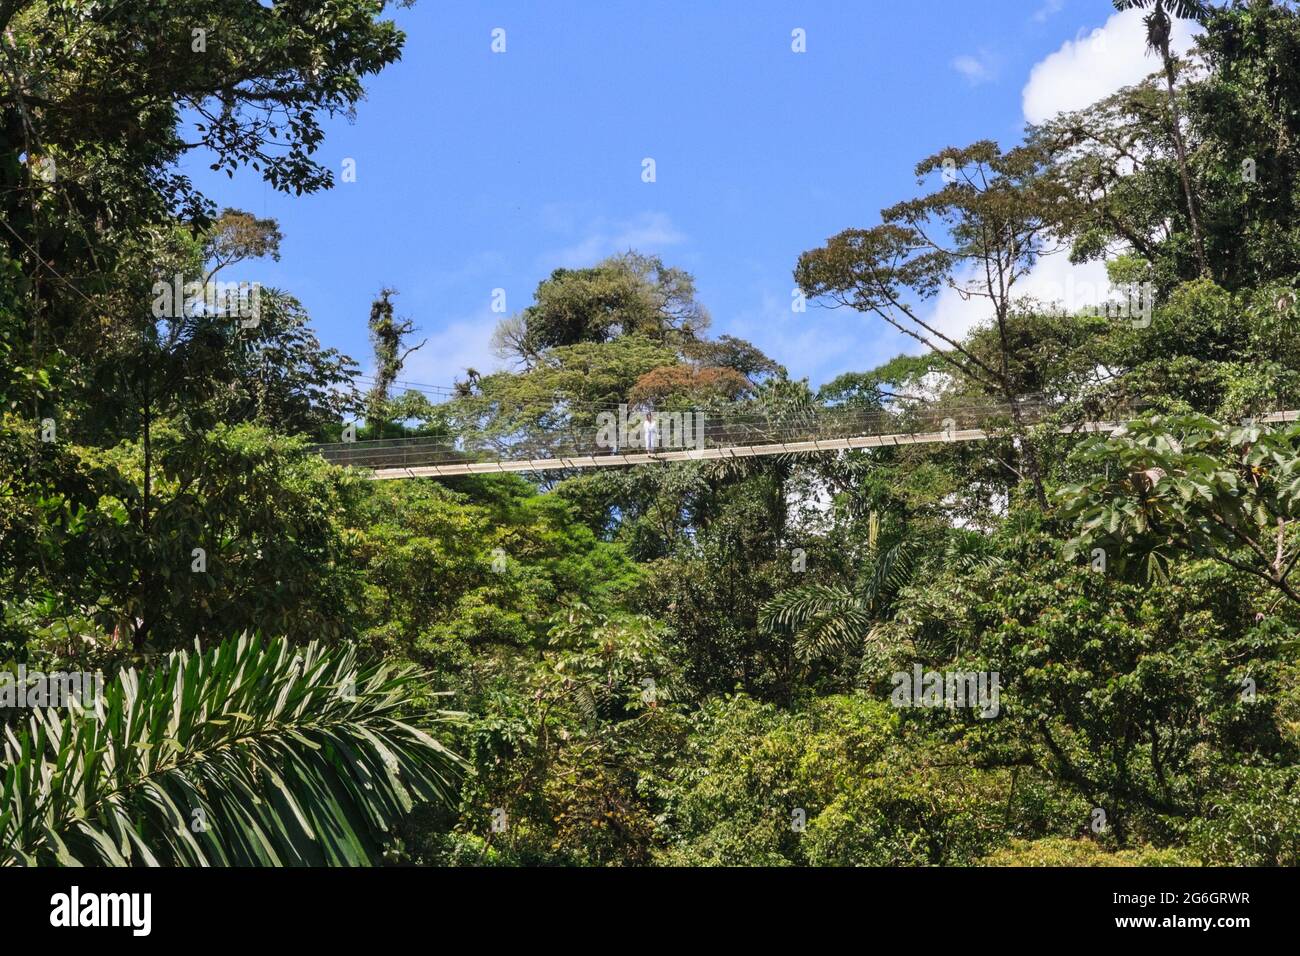 Tourist on hanging bridge, from below, Monteverde Cloud Forest Biological Reserve, Costa Rica Stock Photo